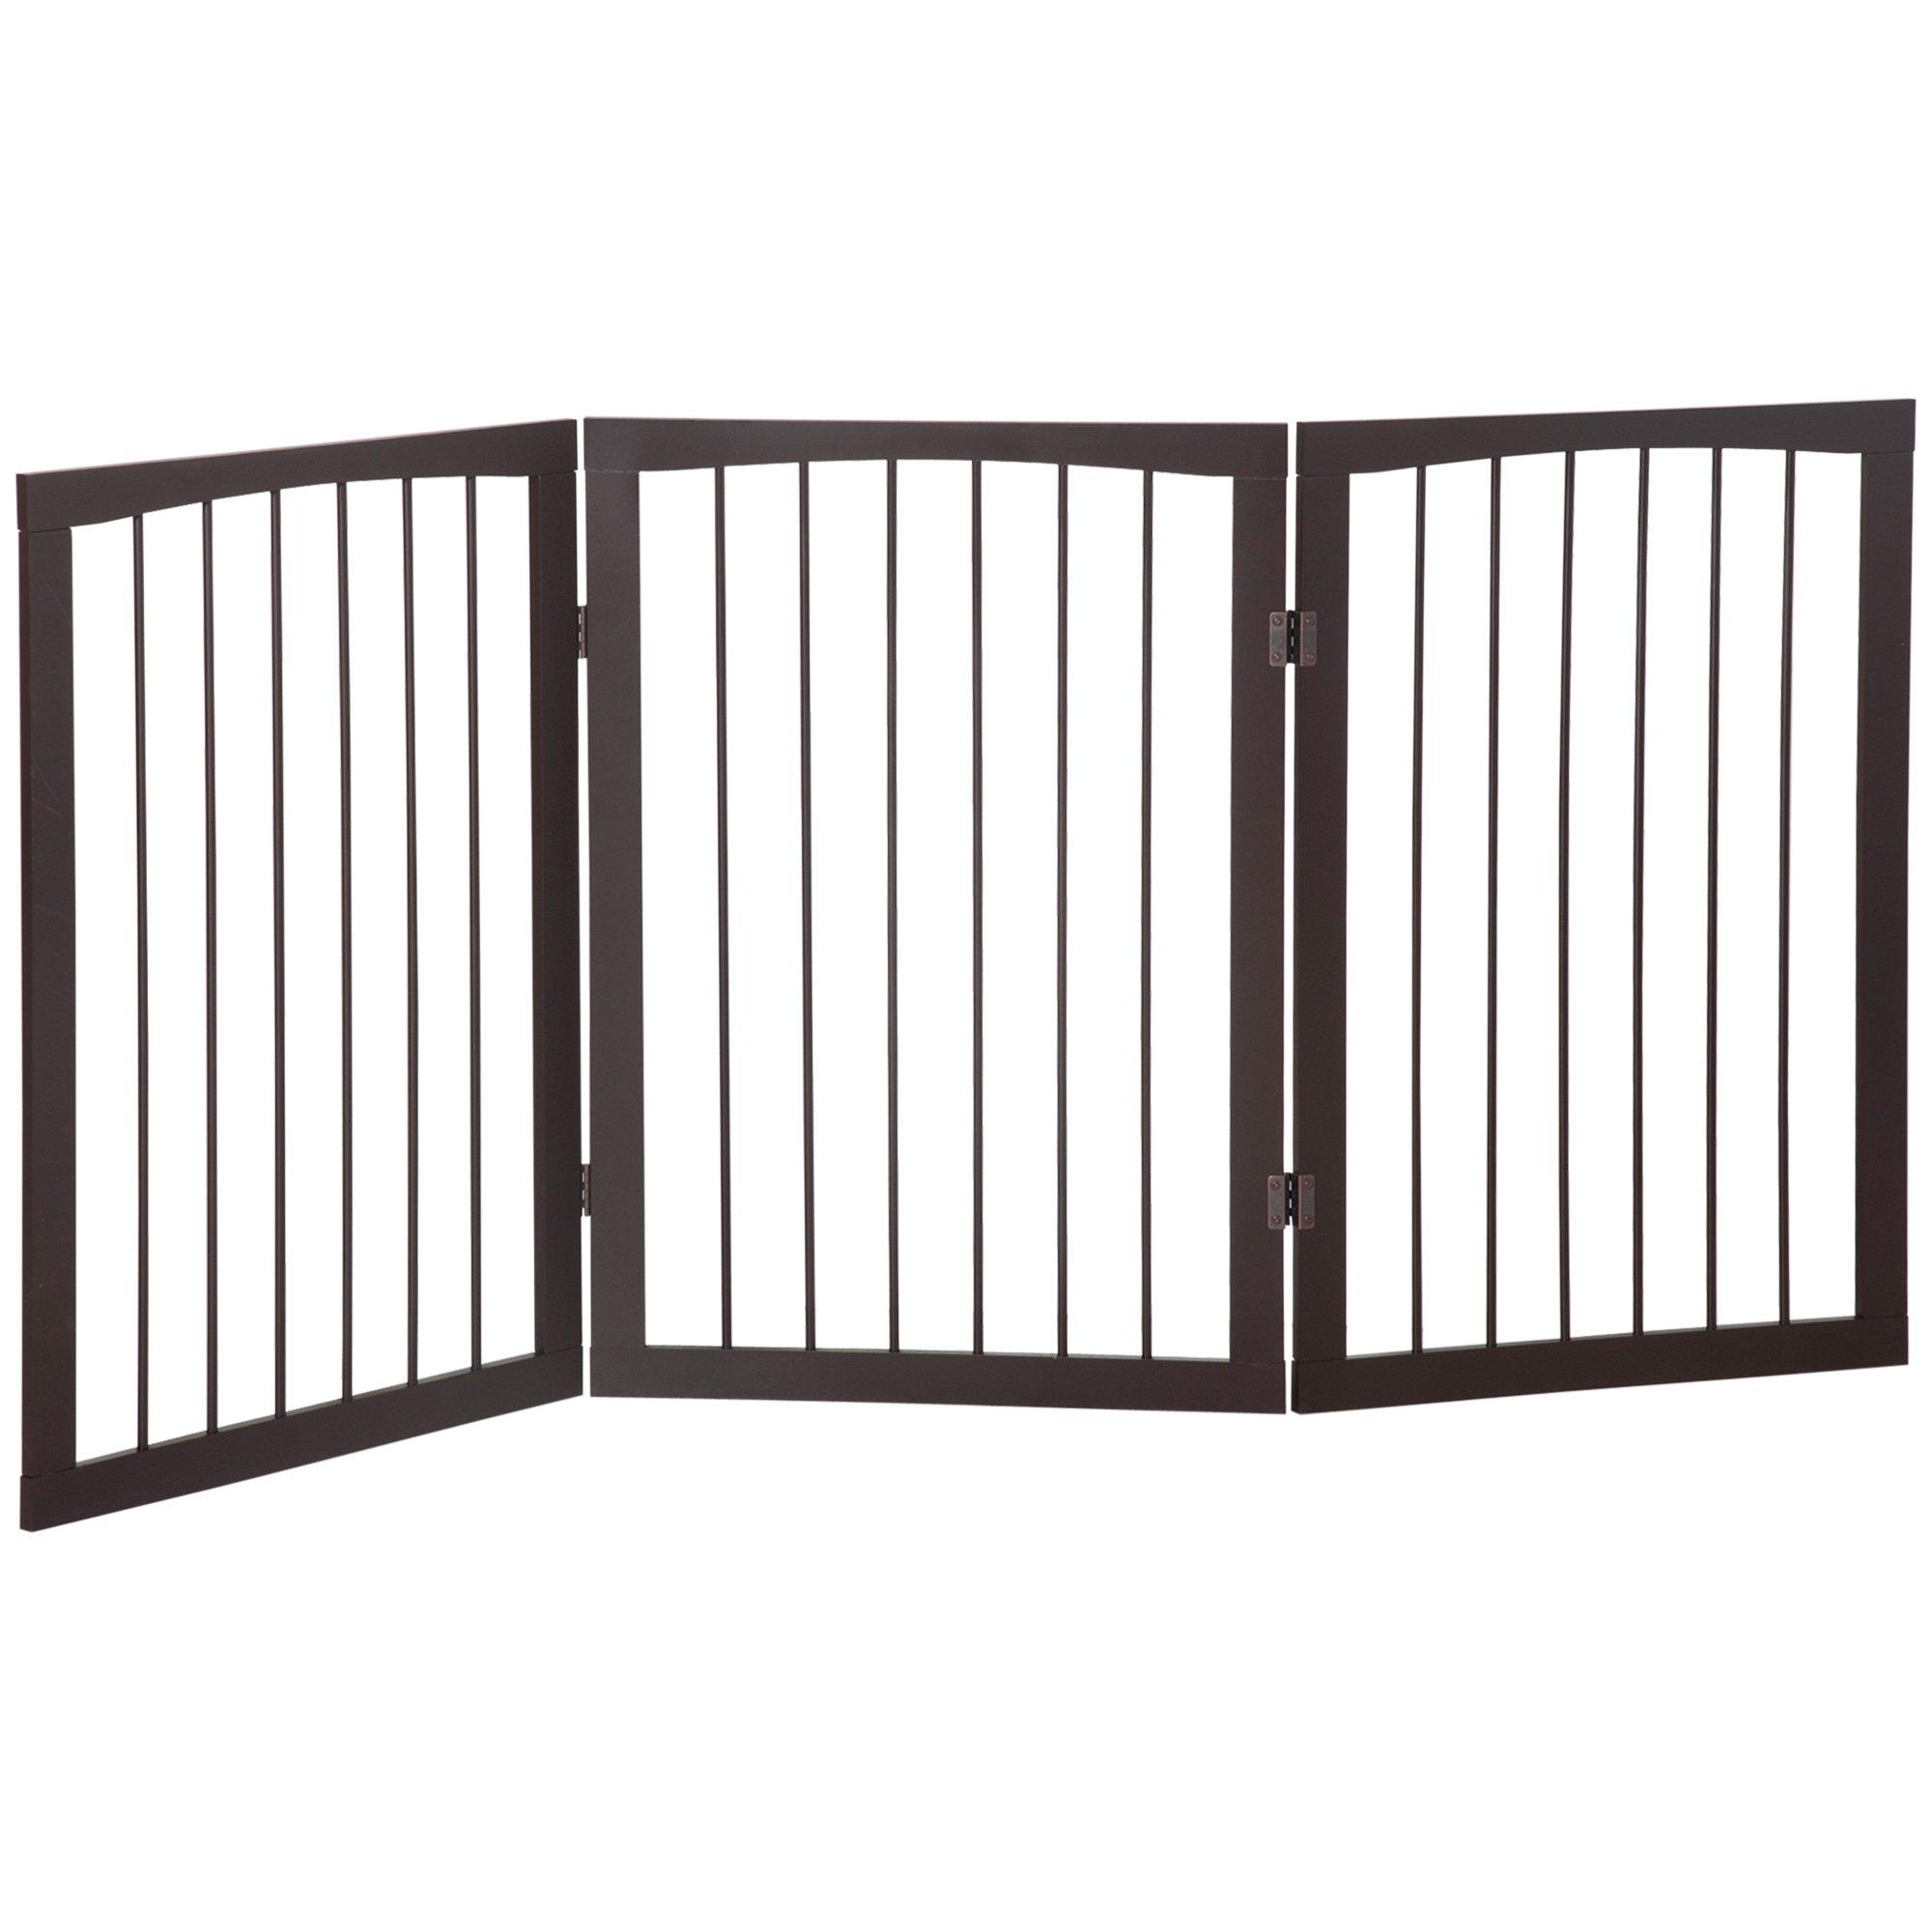 Folding Pet Gate Dog Fence Child Safety Indoor Durable Free Standing